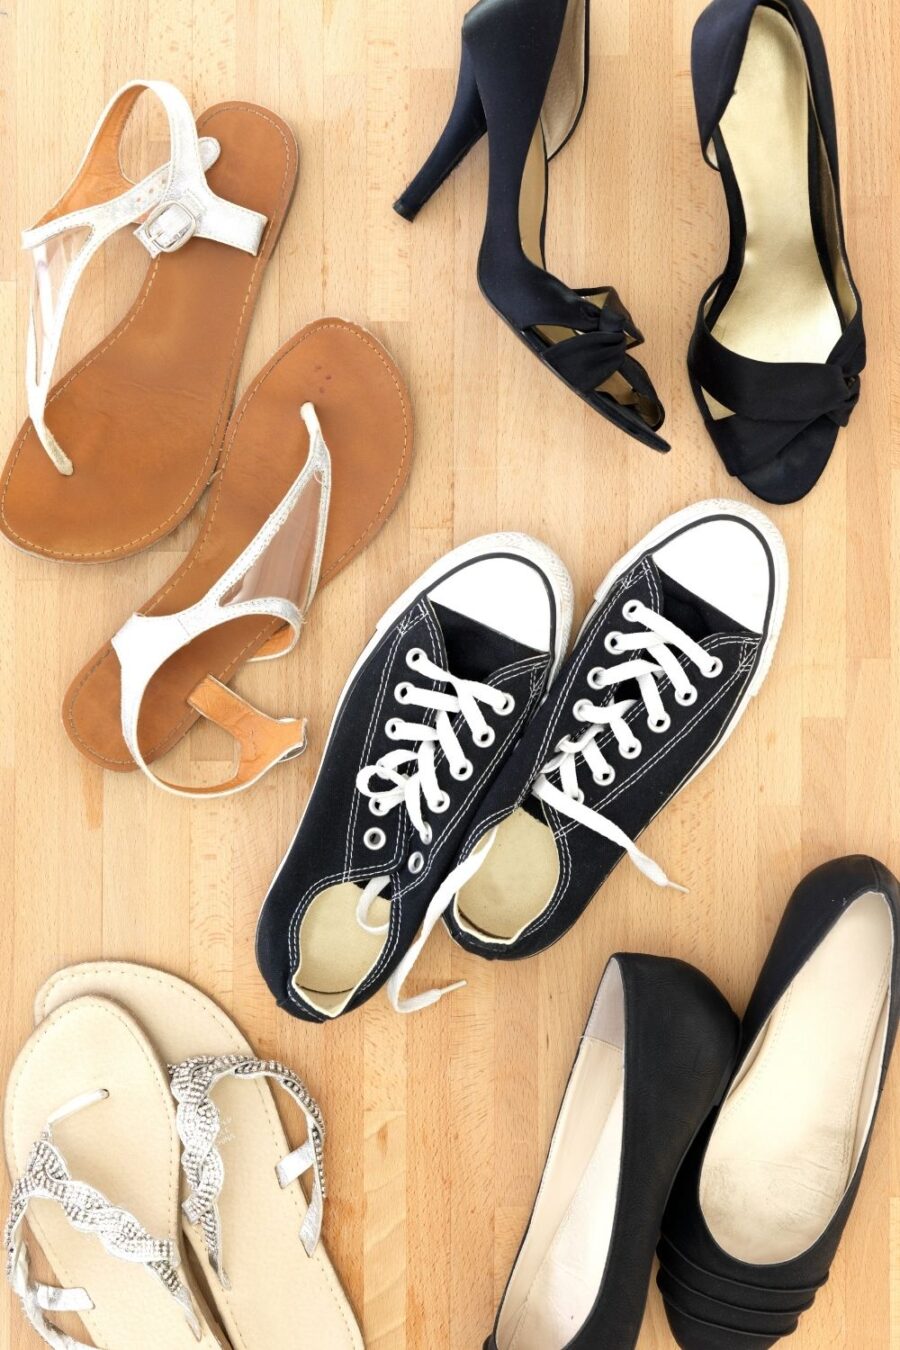 How To Declutter Shoes For Shoe Lovers